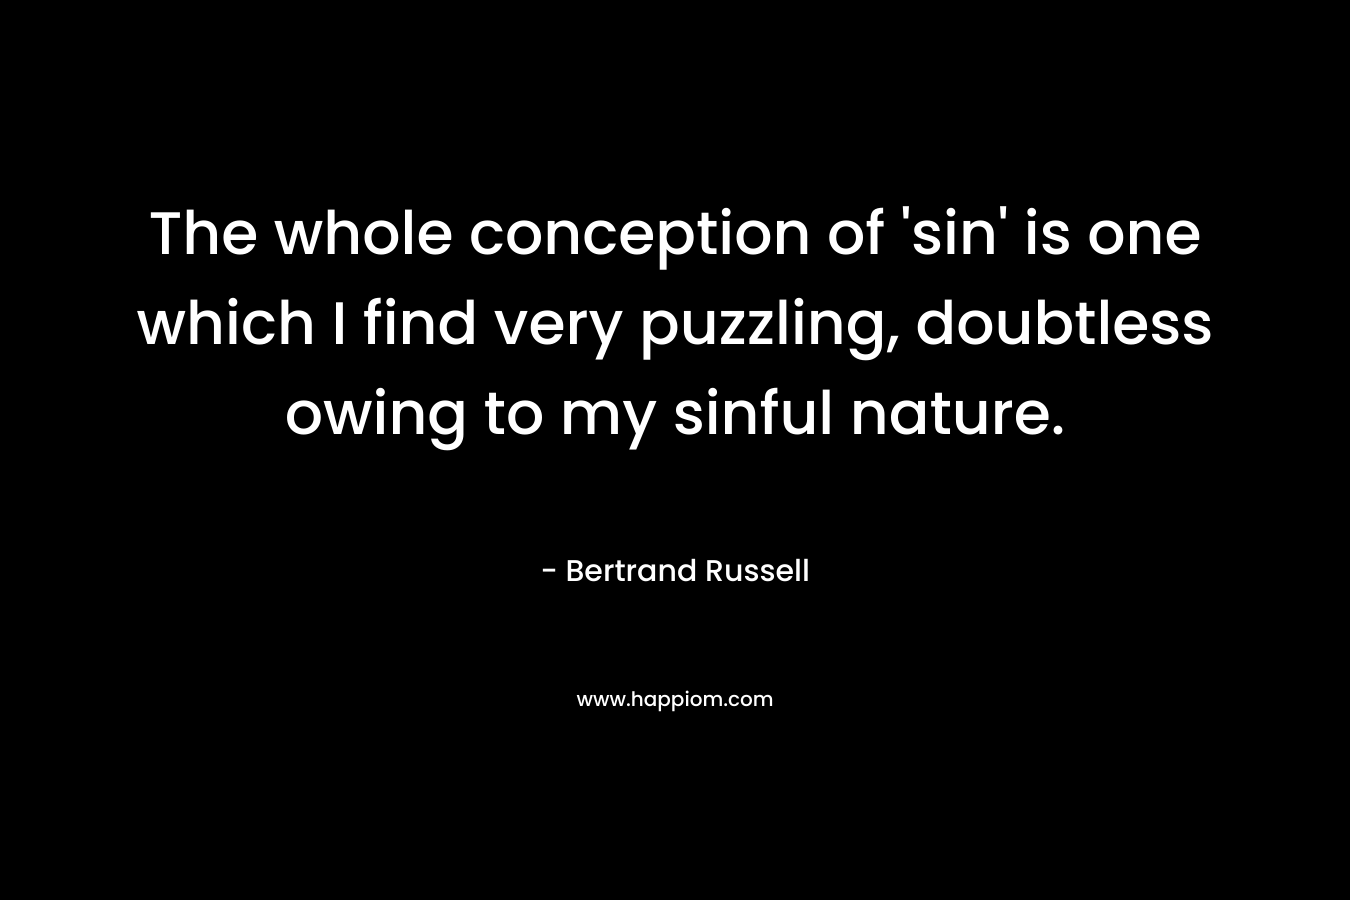 The whole conception of 'sin' is one which I find very puzzling, doubtless owing to my sinful nature.